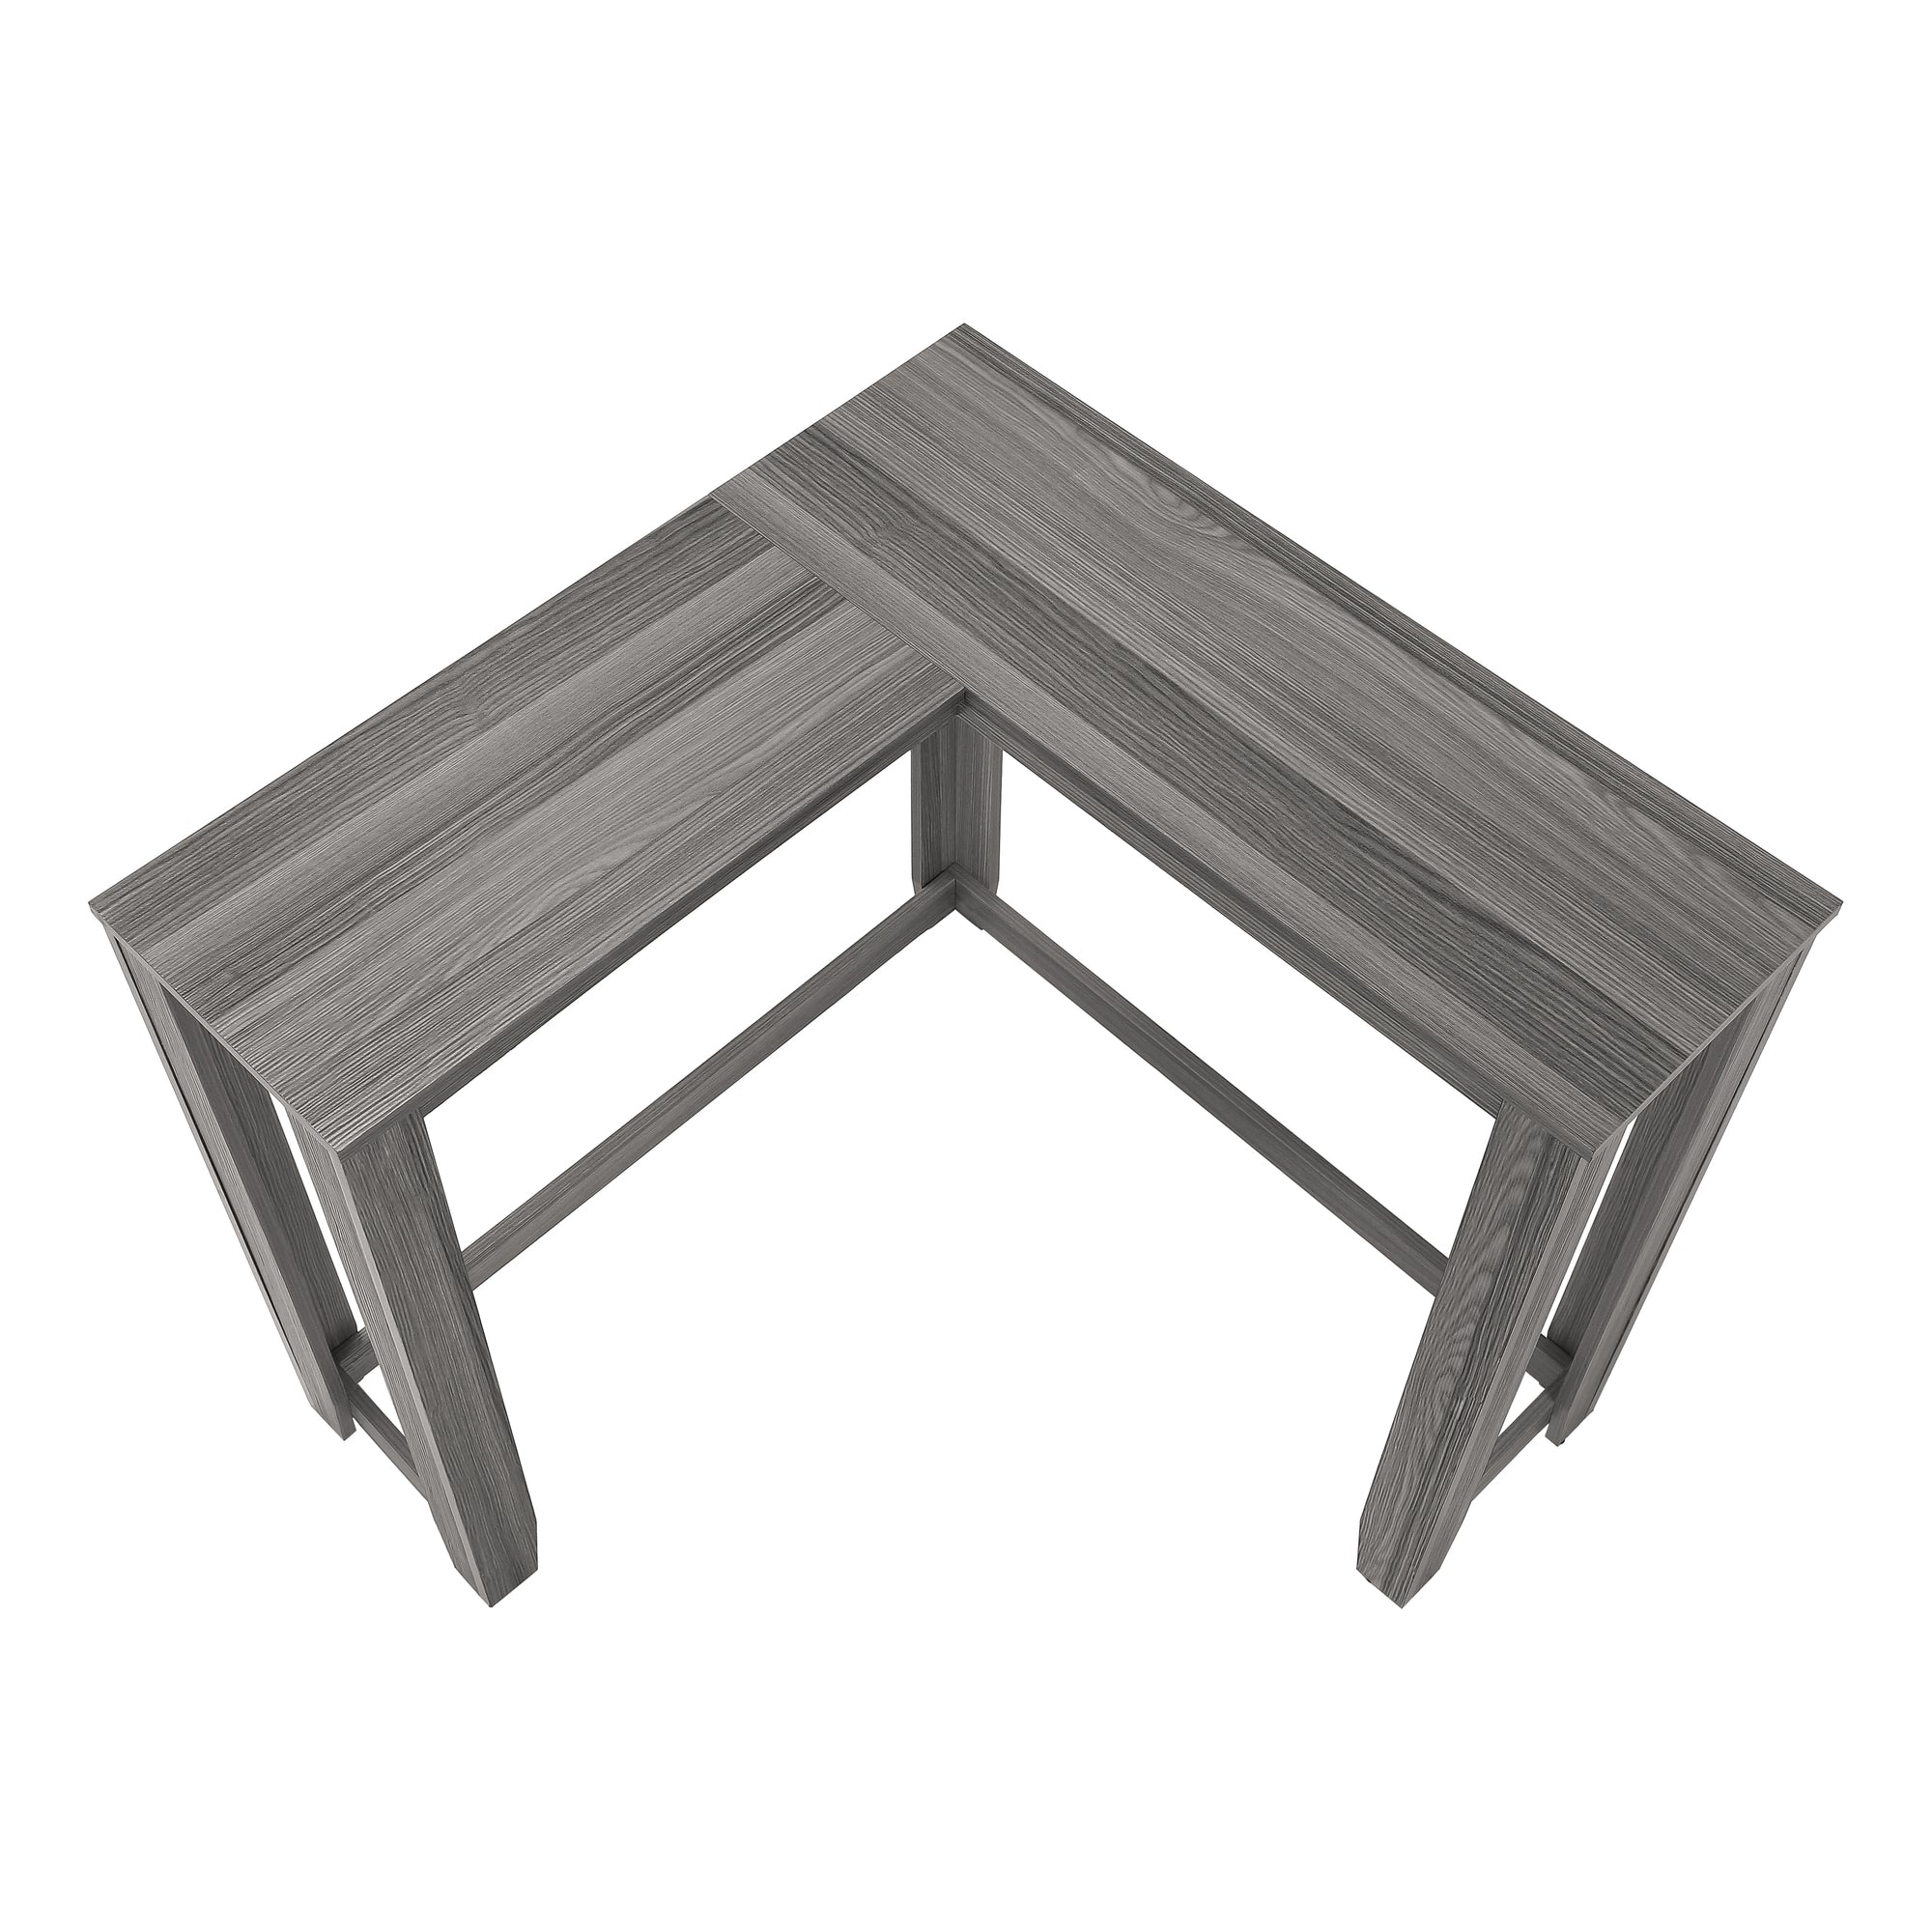 MN-103658    Accent Table, Console, Entryway, Narrow, Corner, Living Room, Bedroom, Laminate, Grey, Contemporary, Modern